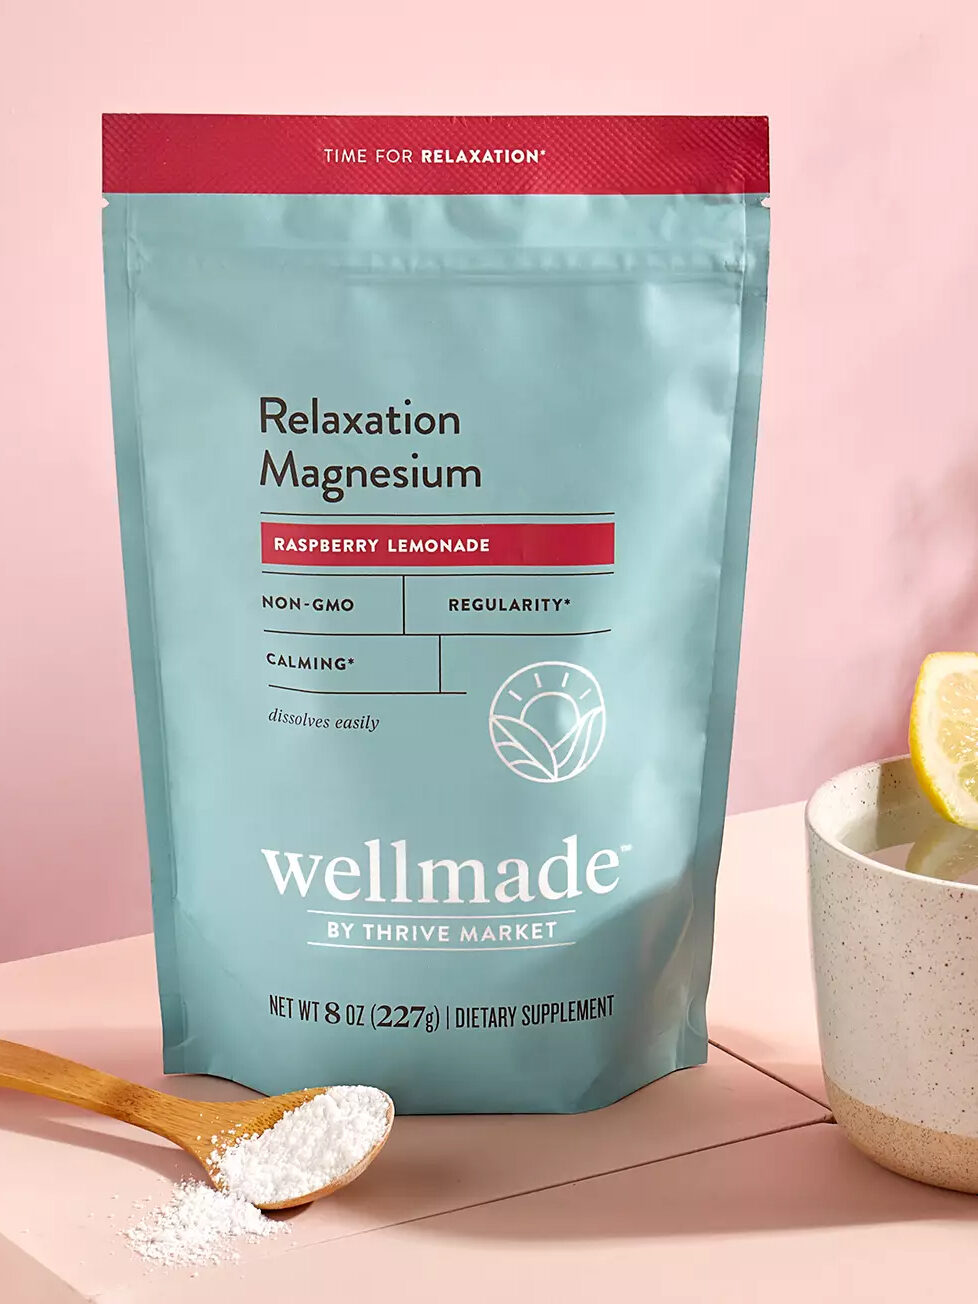 Magnesium supplements from wellmade